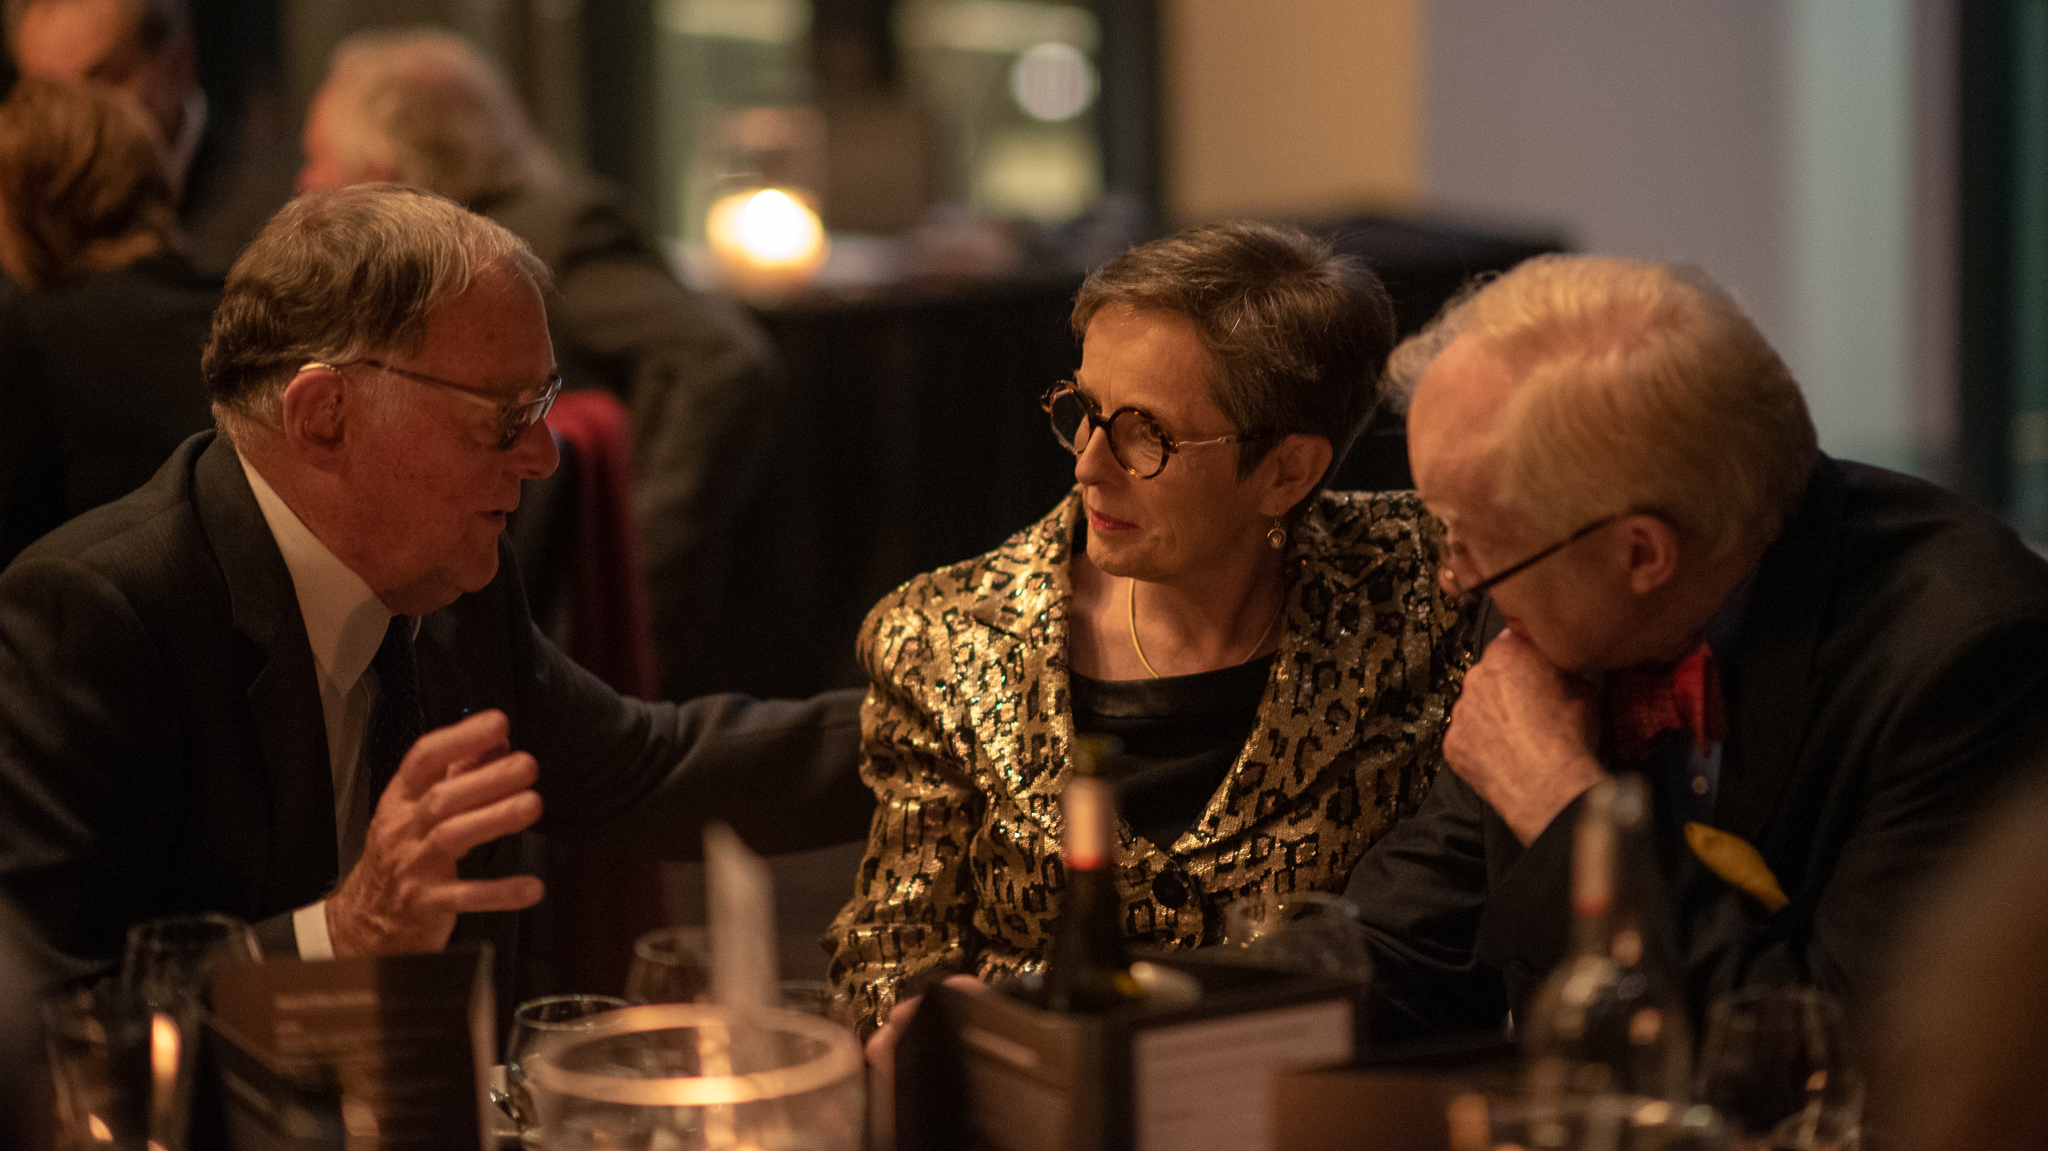 A trio of Opera lovers deep in discussion over dinner